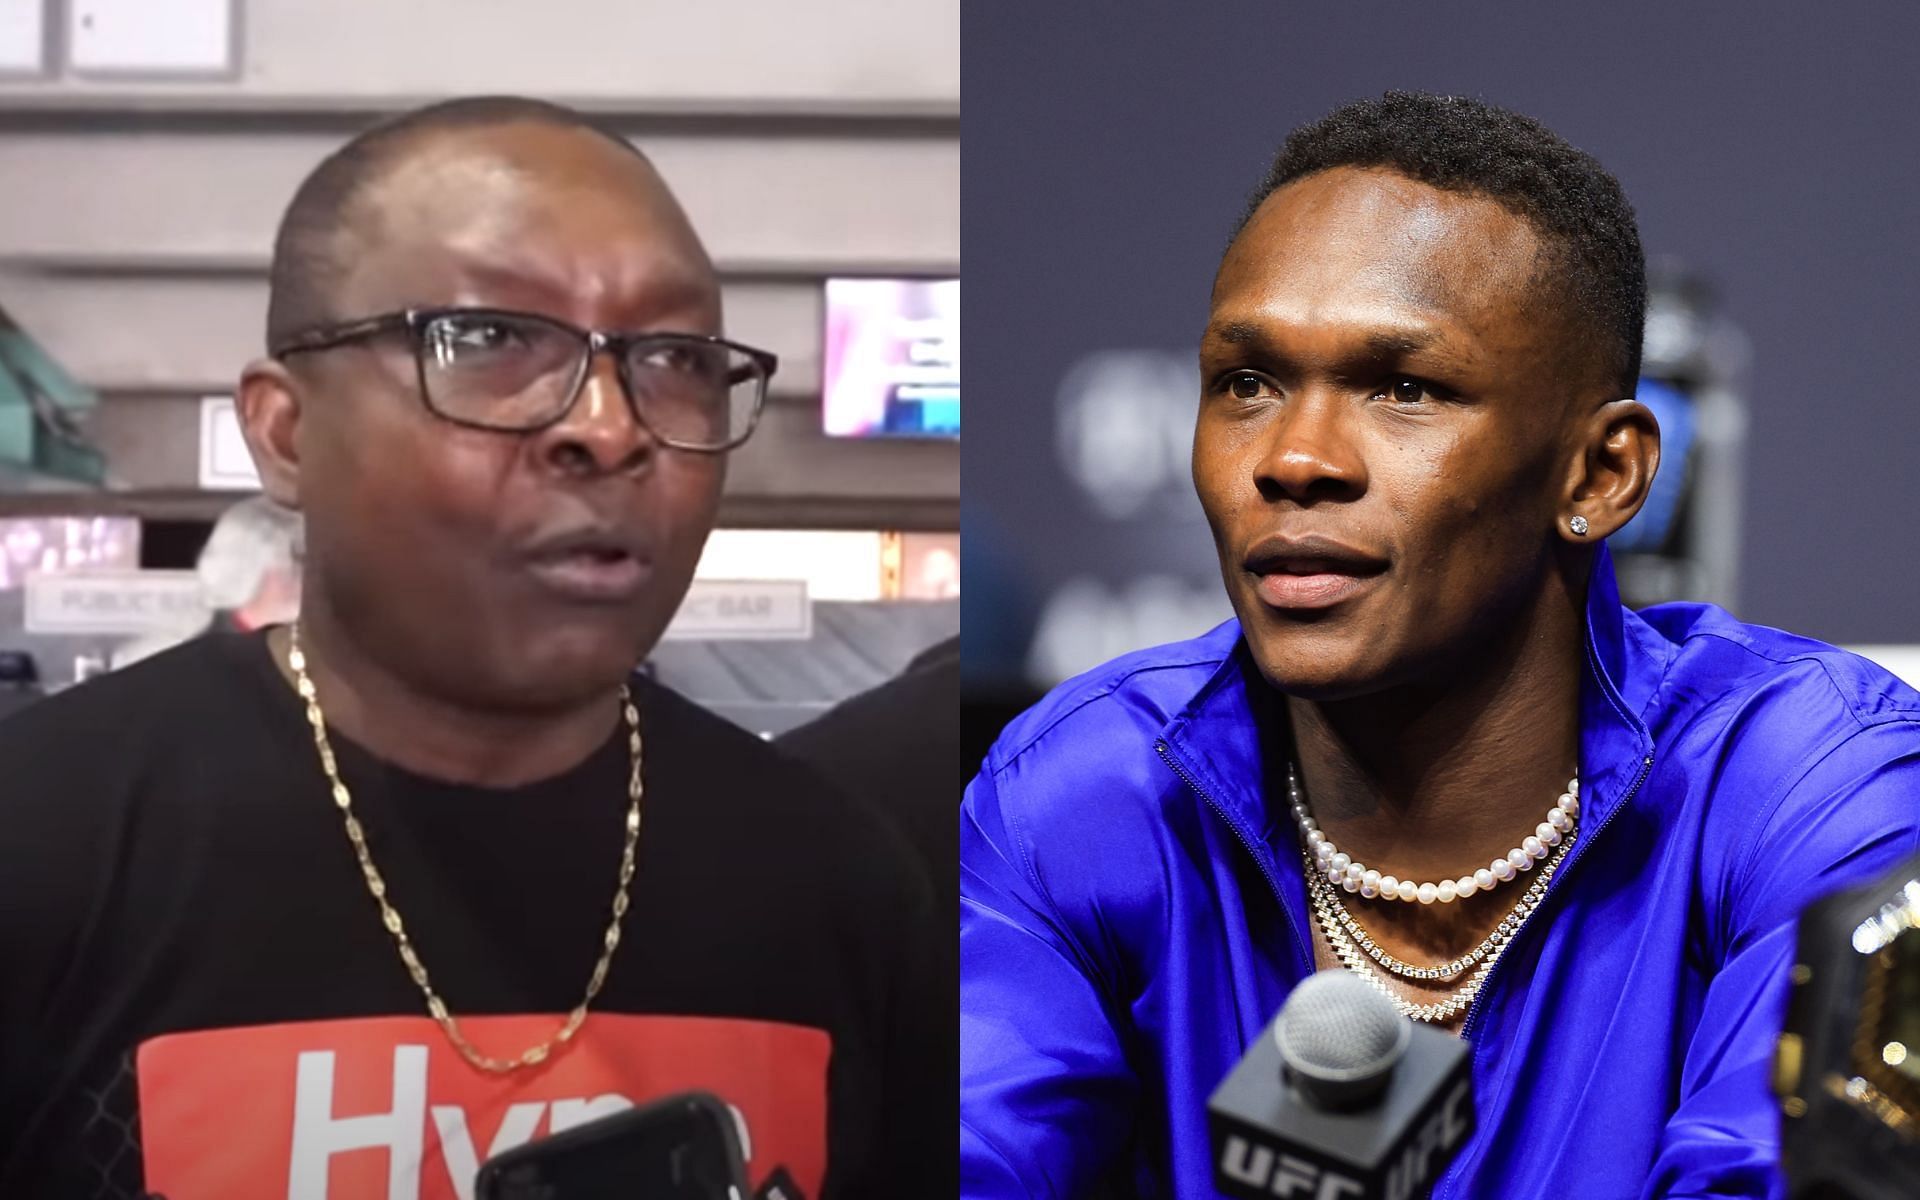 Oluwafemi (Left) and Israel Adesanya (Right) [Image courtesy: Submission Radio YouTube channel and Getty Images]